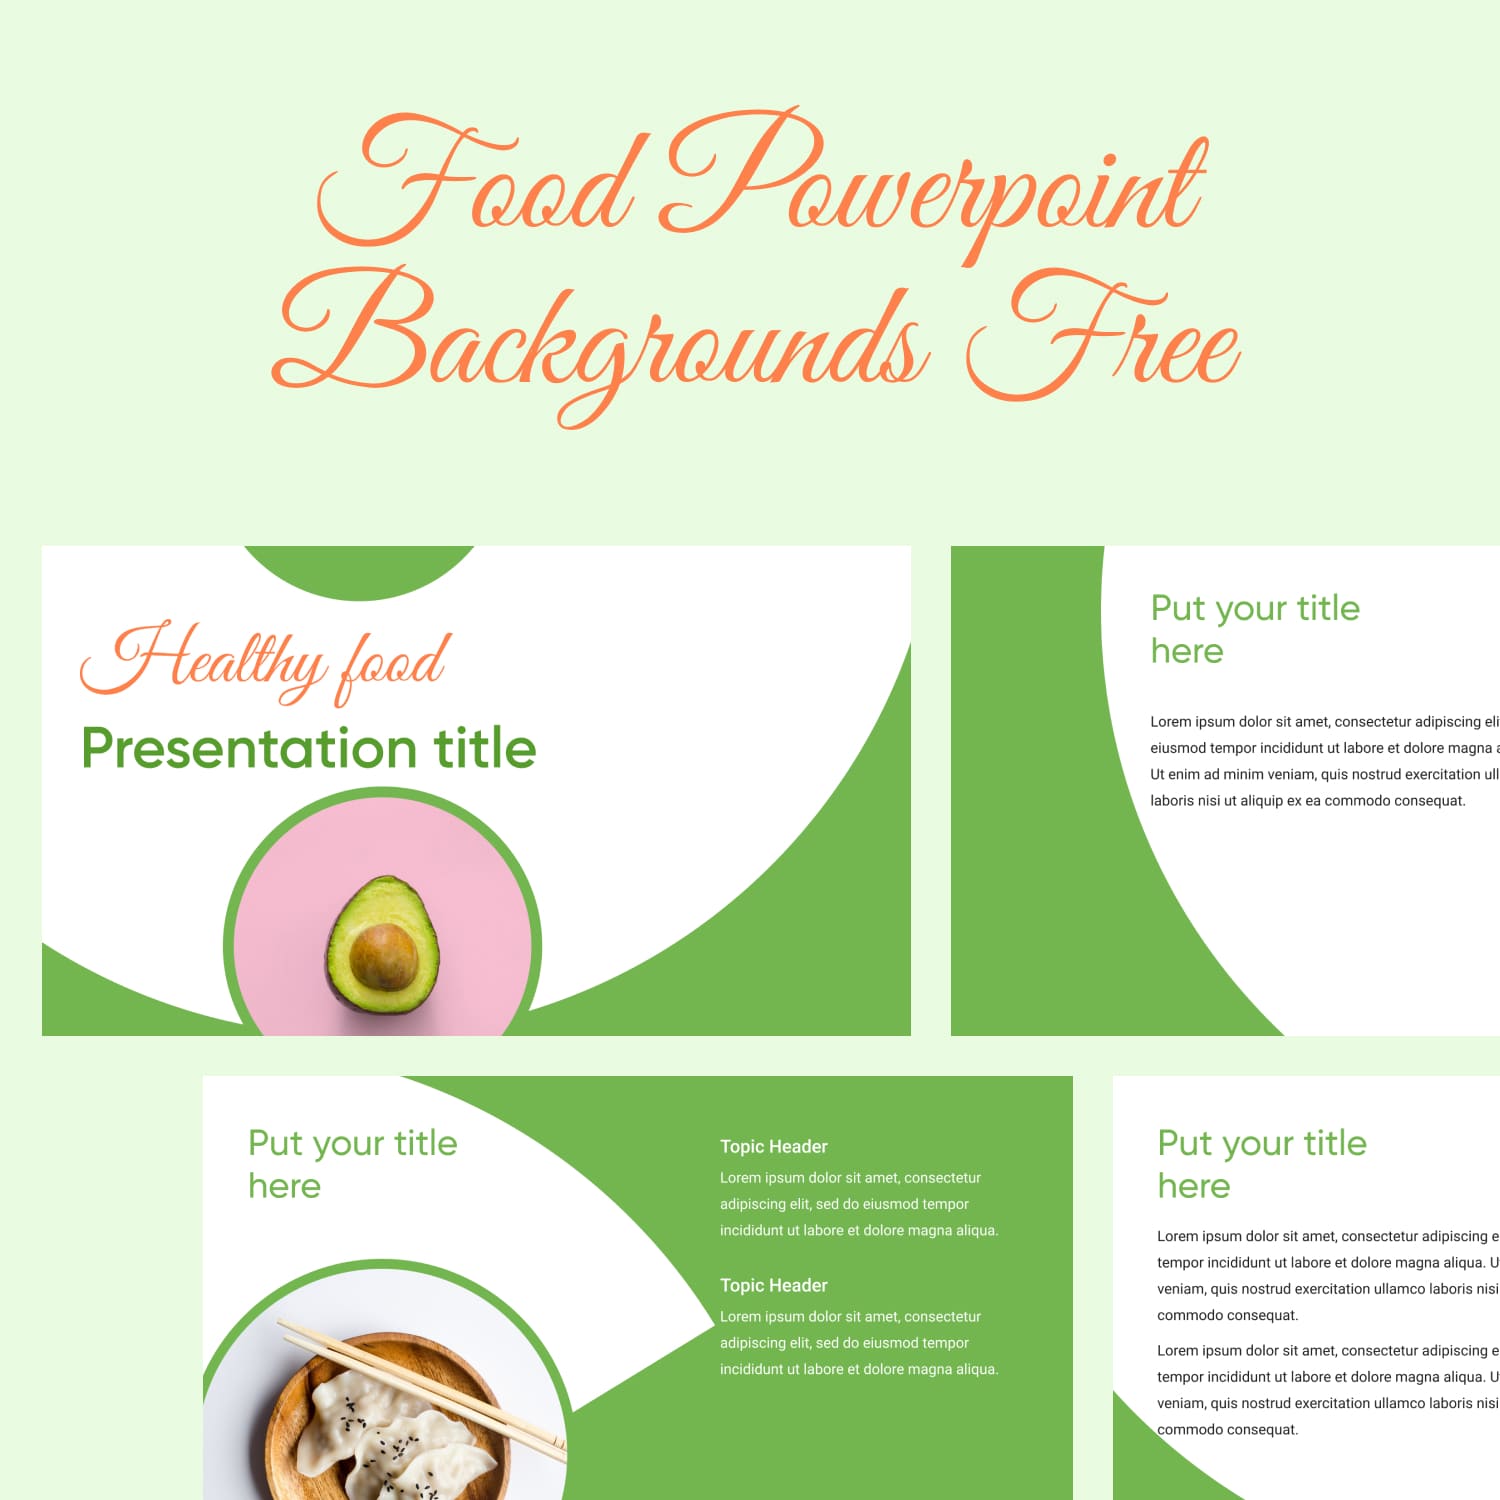 Food Powerpoint Backgrounds Free 1500 1500 1.